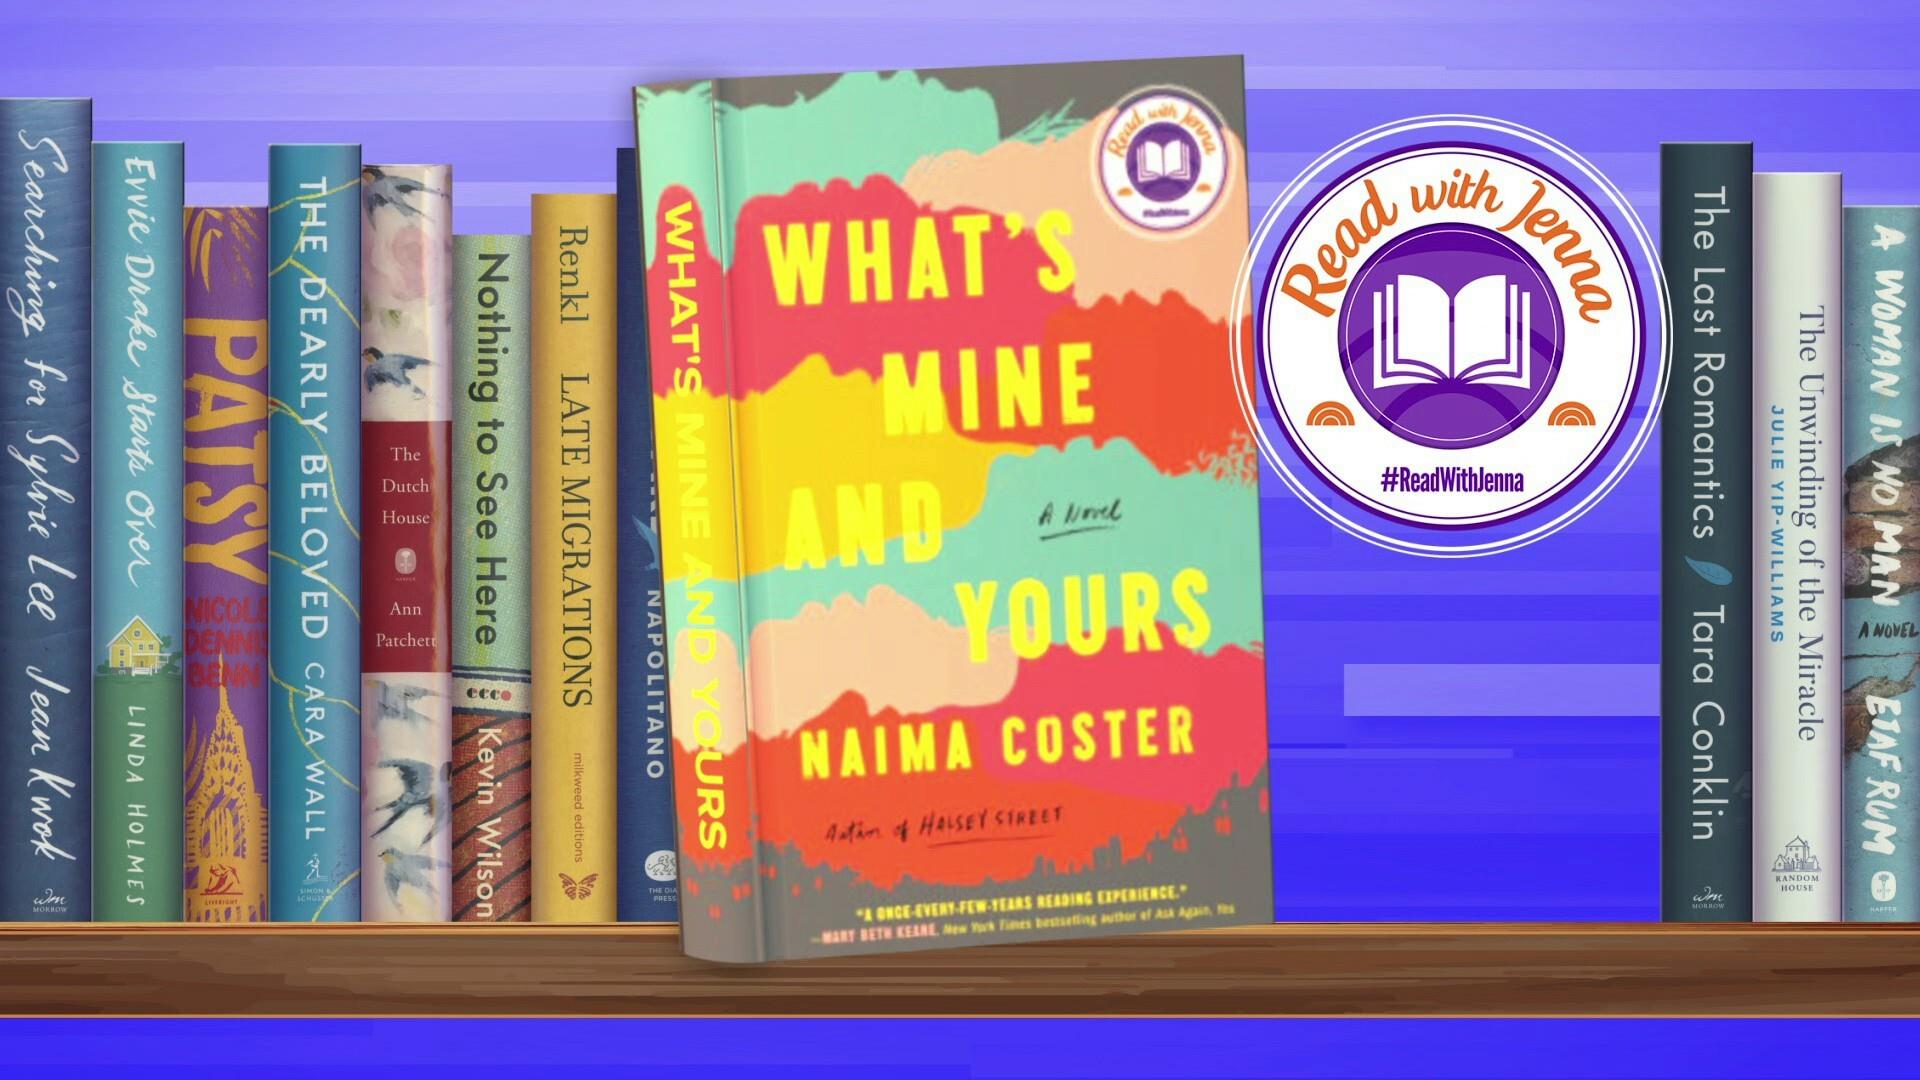 Watch TODAY Highlight Read With Jenna Naima Coster talks about ‘What